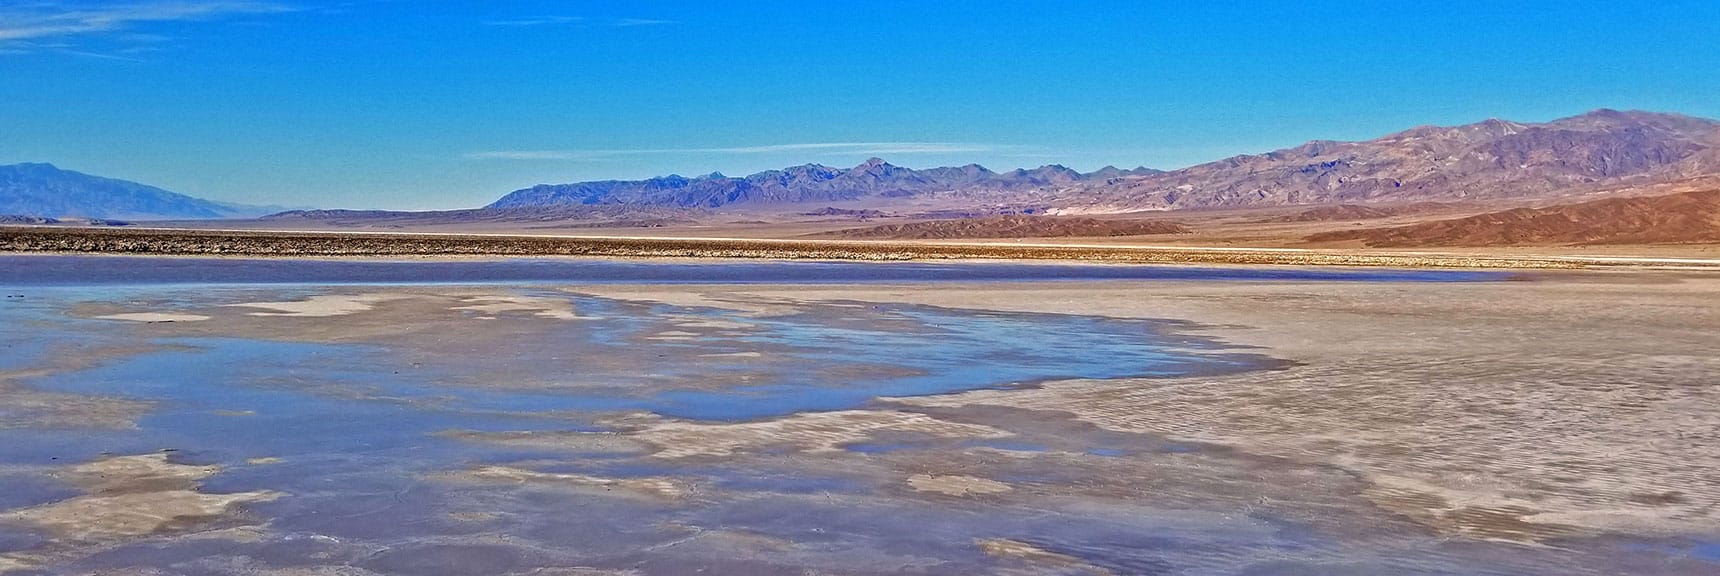 At the Shore of the Lake Looking North. | Return of Lake Manly (Lake in Death Valley) | Death Valley National Park, California